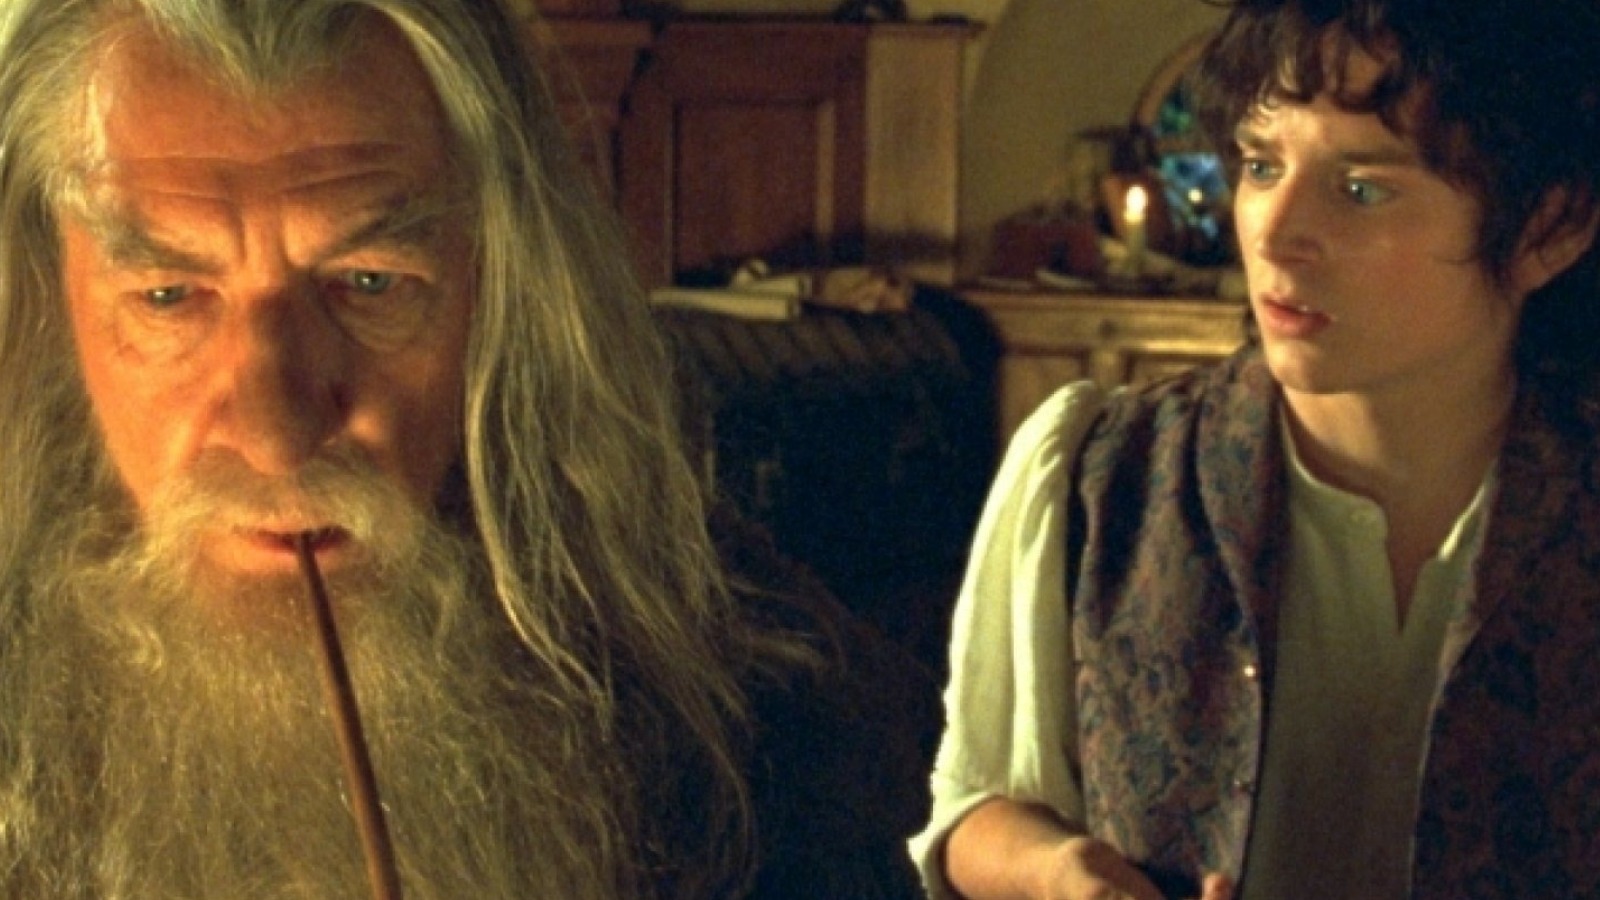 Every Fellowship Of The Ring Member From Lord Of The Rings Ranked